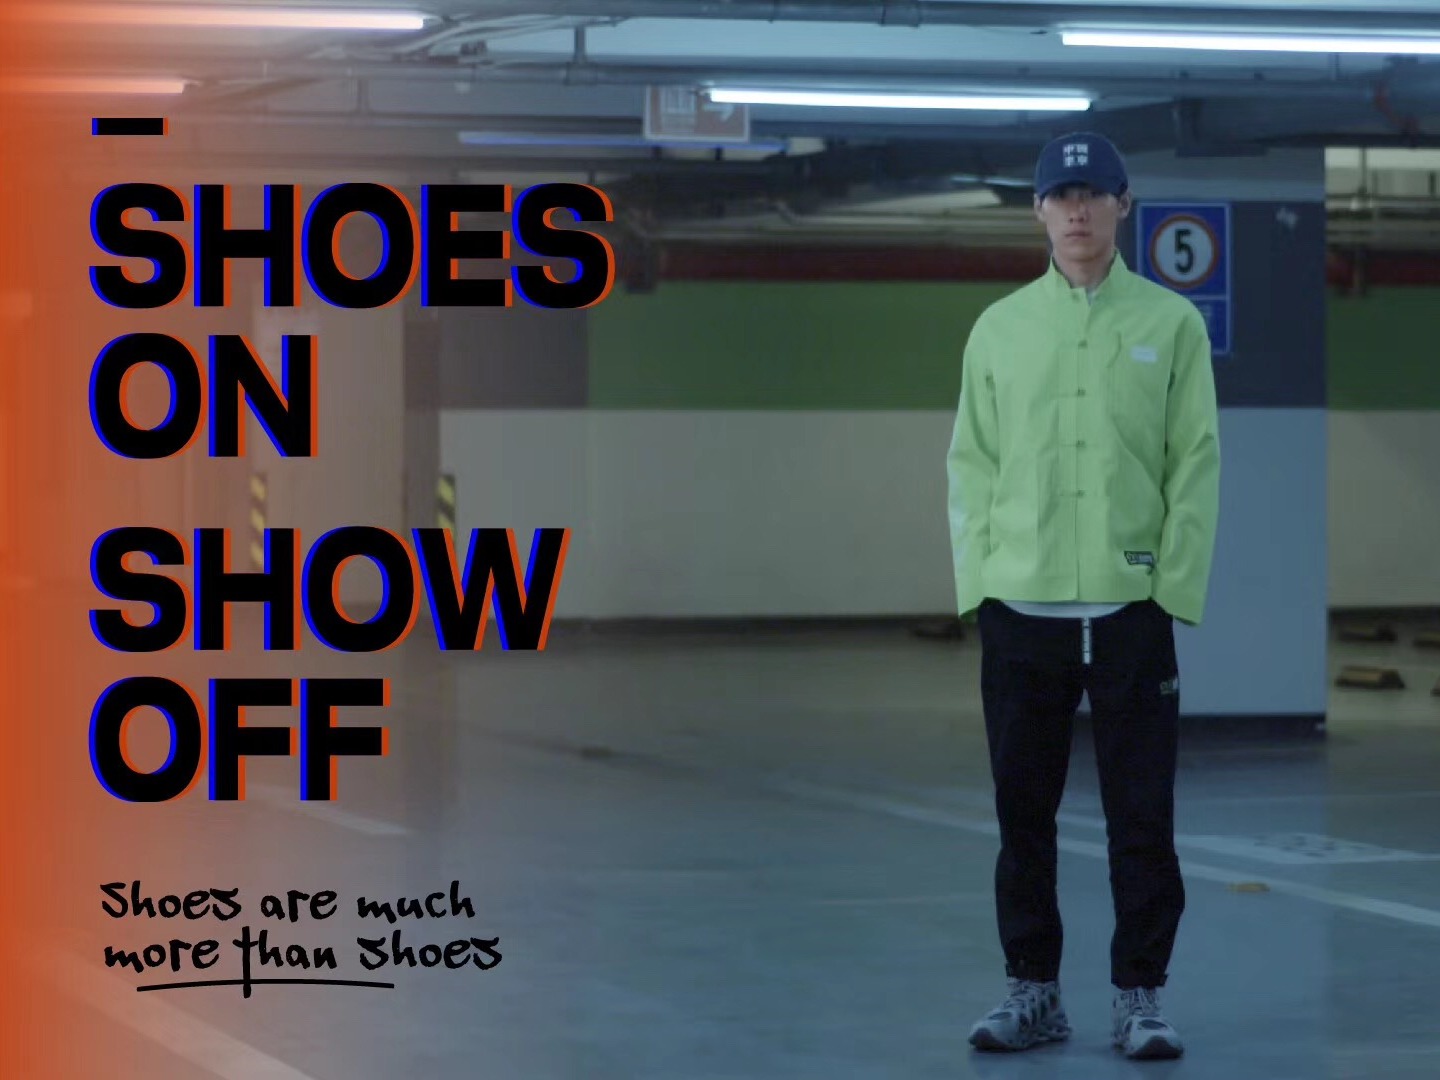 IFS x 万象映画  # SHOES ON SHOW OFF #